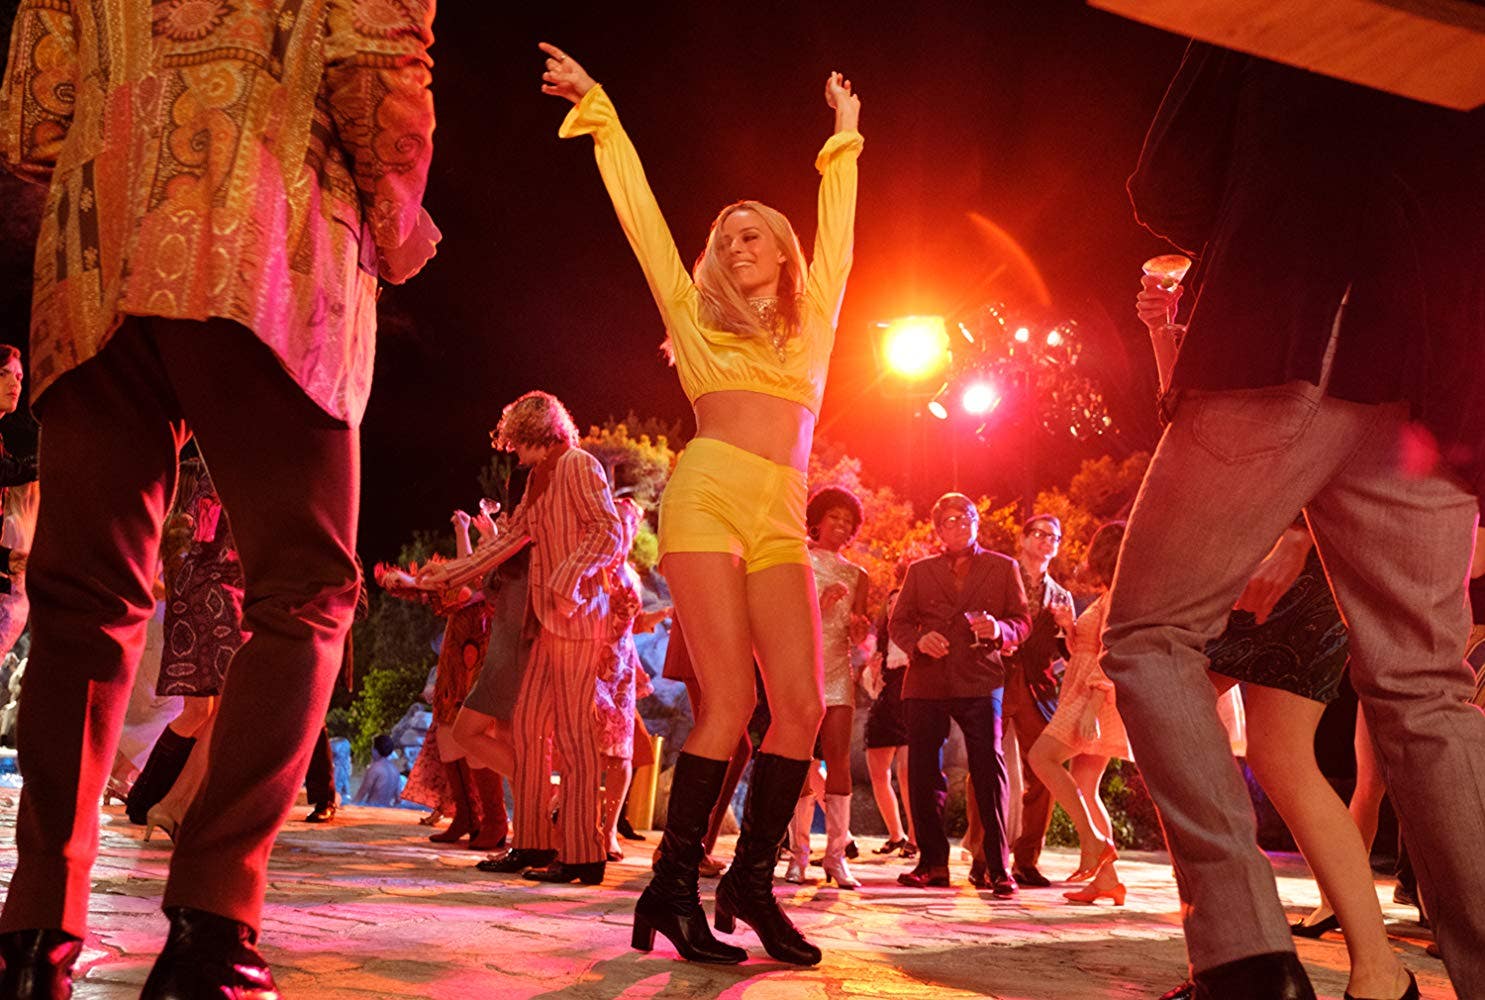 Margot Robbie dances at the Playboy Mansion in "Once Upon a Time in Hollywood"